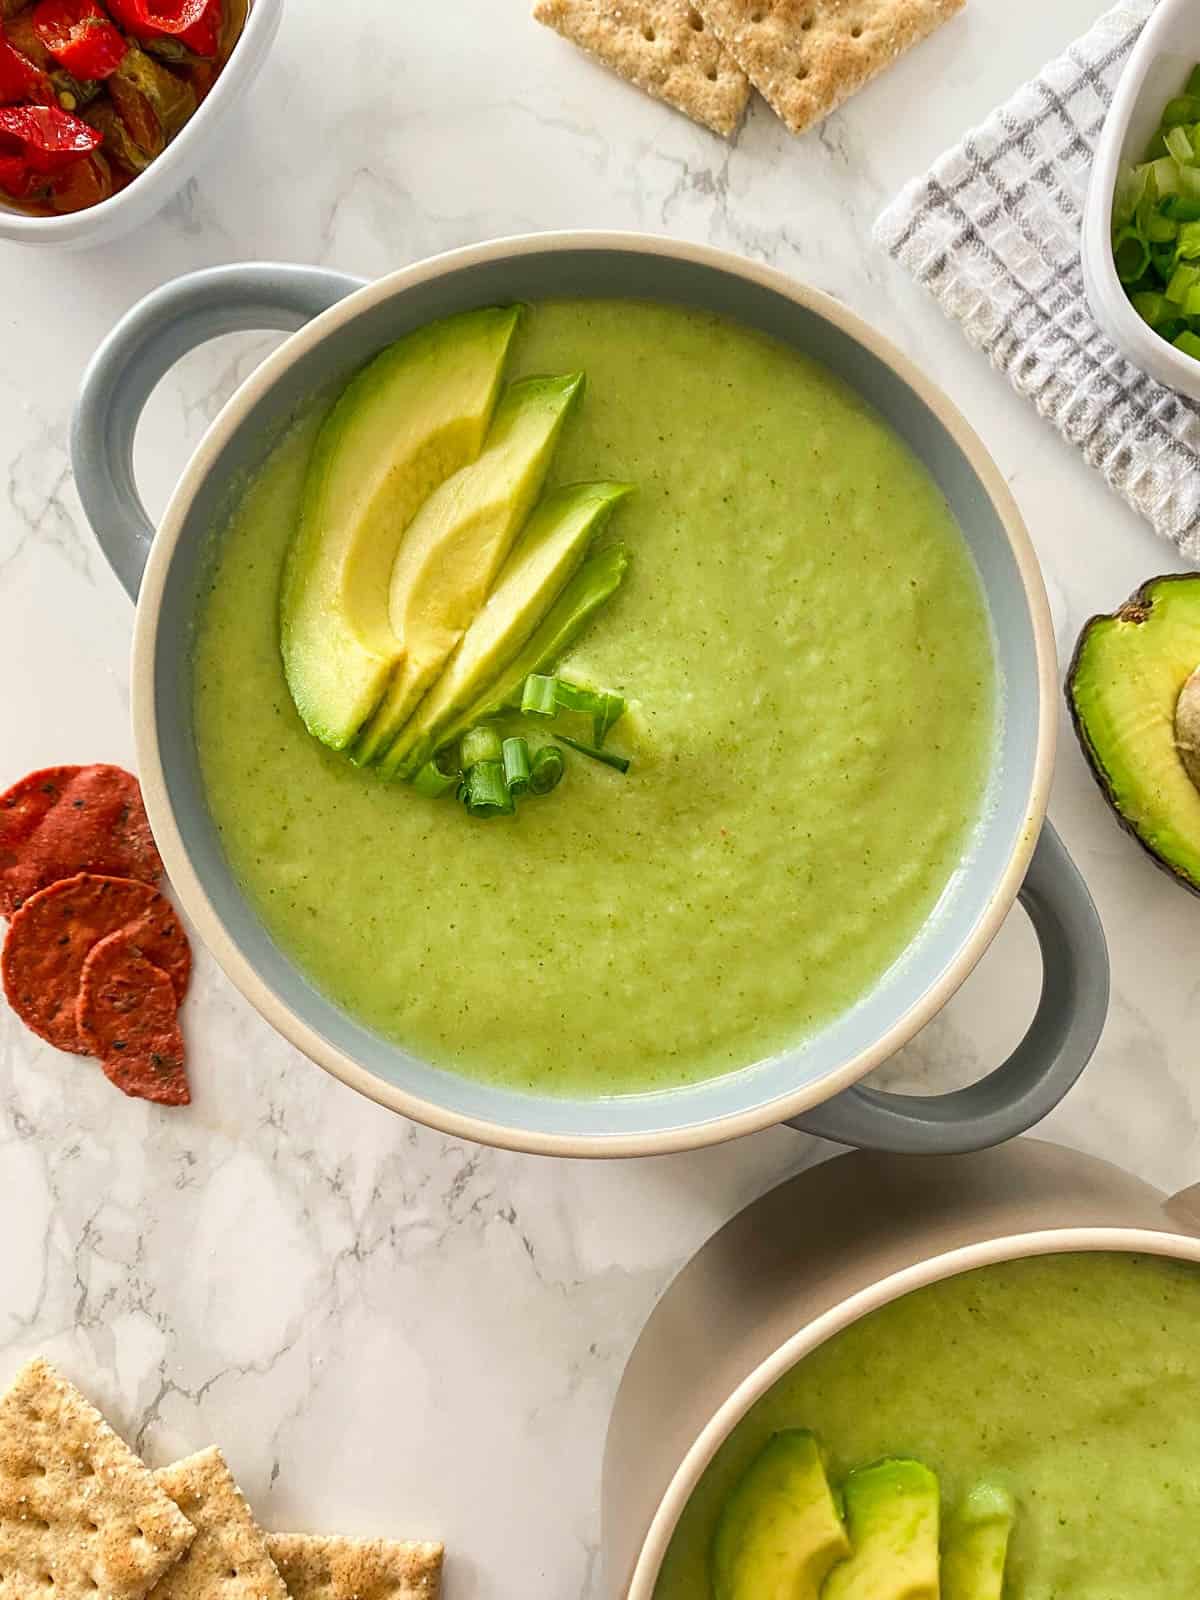 Green creamy soup in bowl with handles and avocado slices on top.